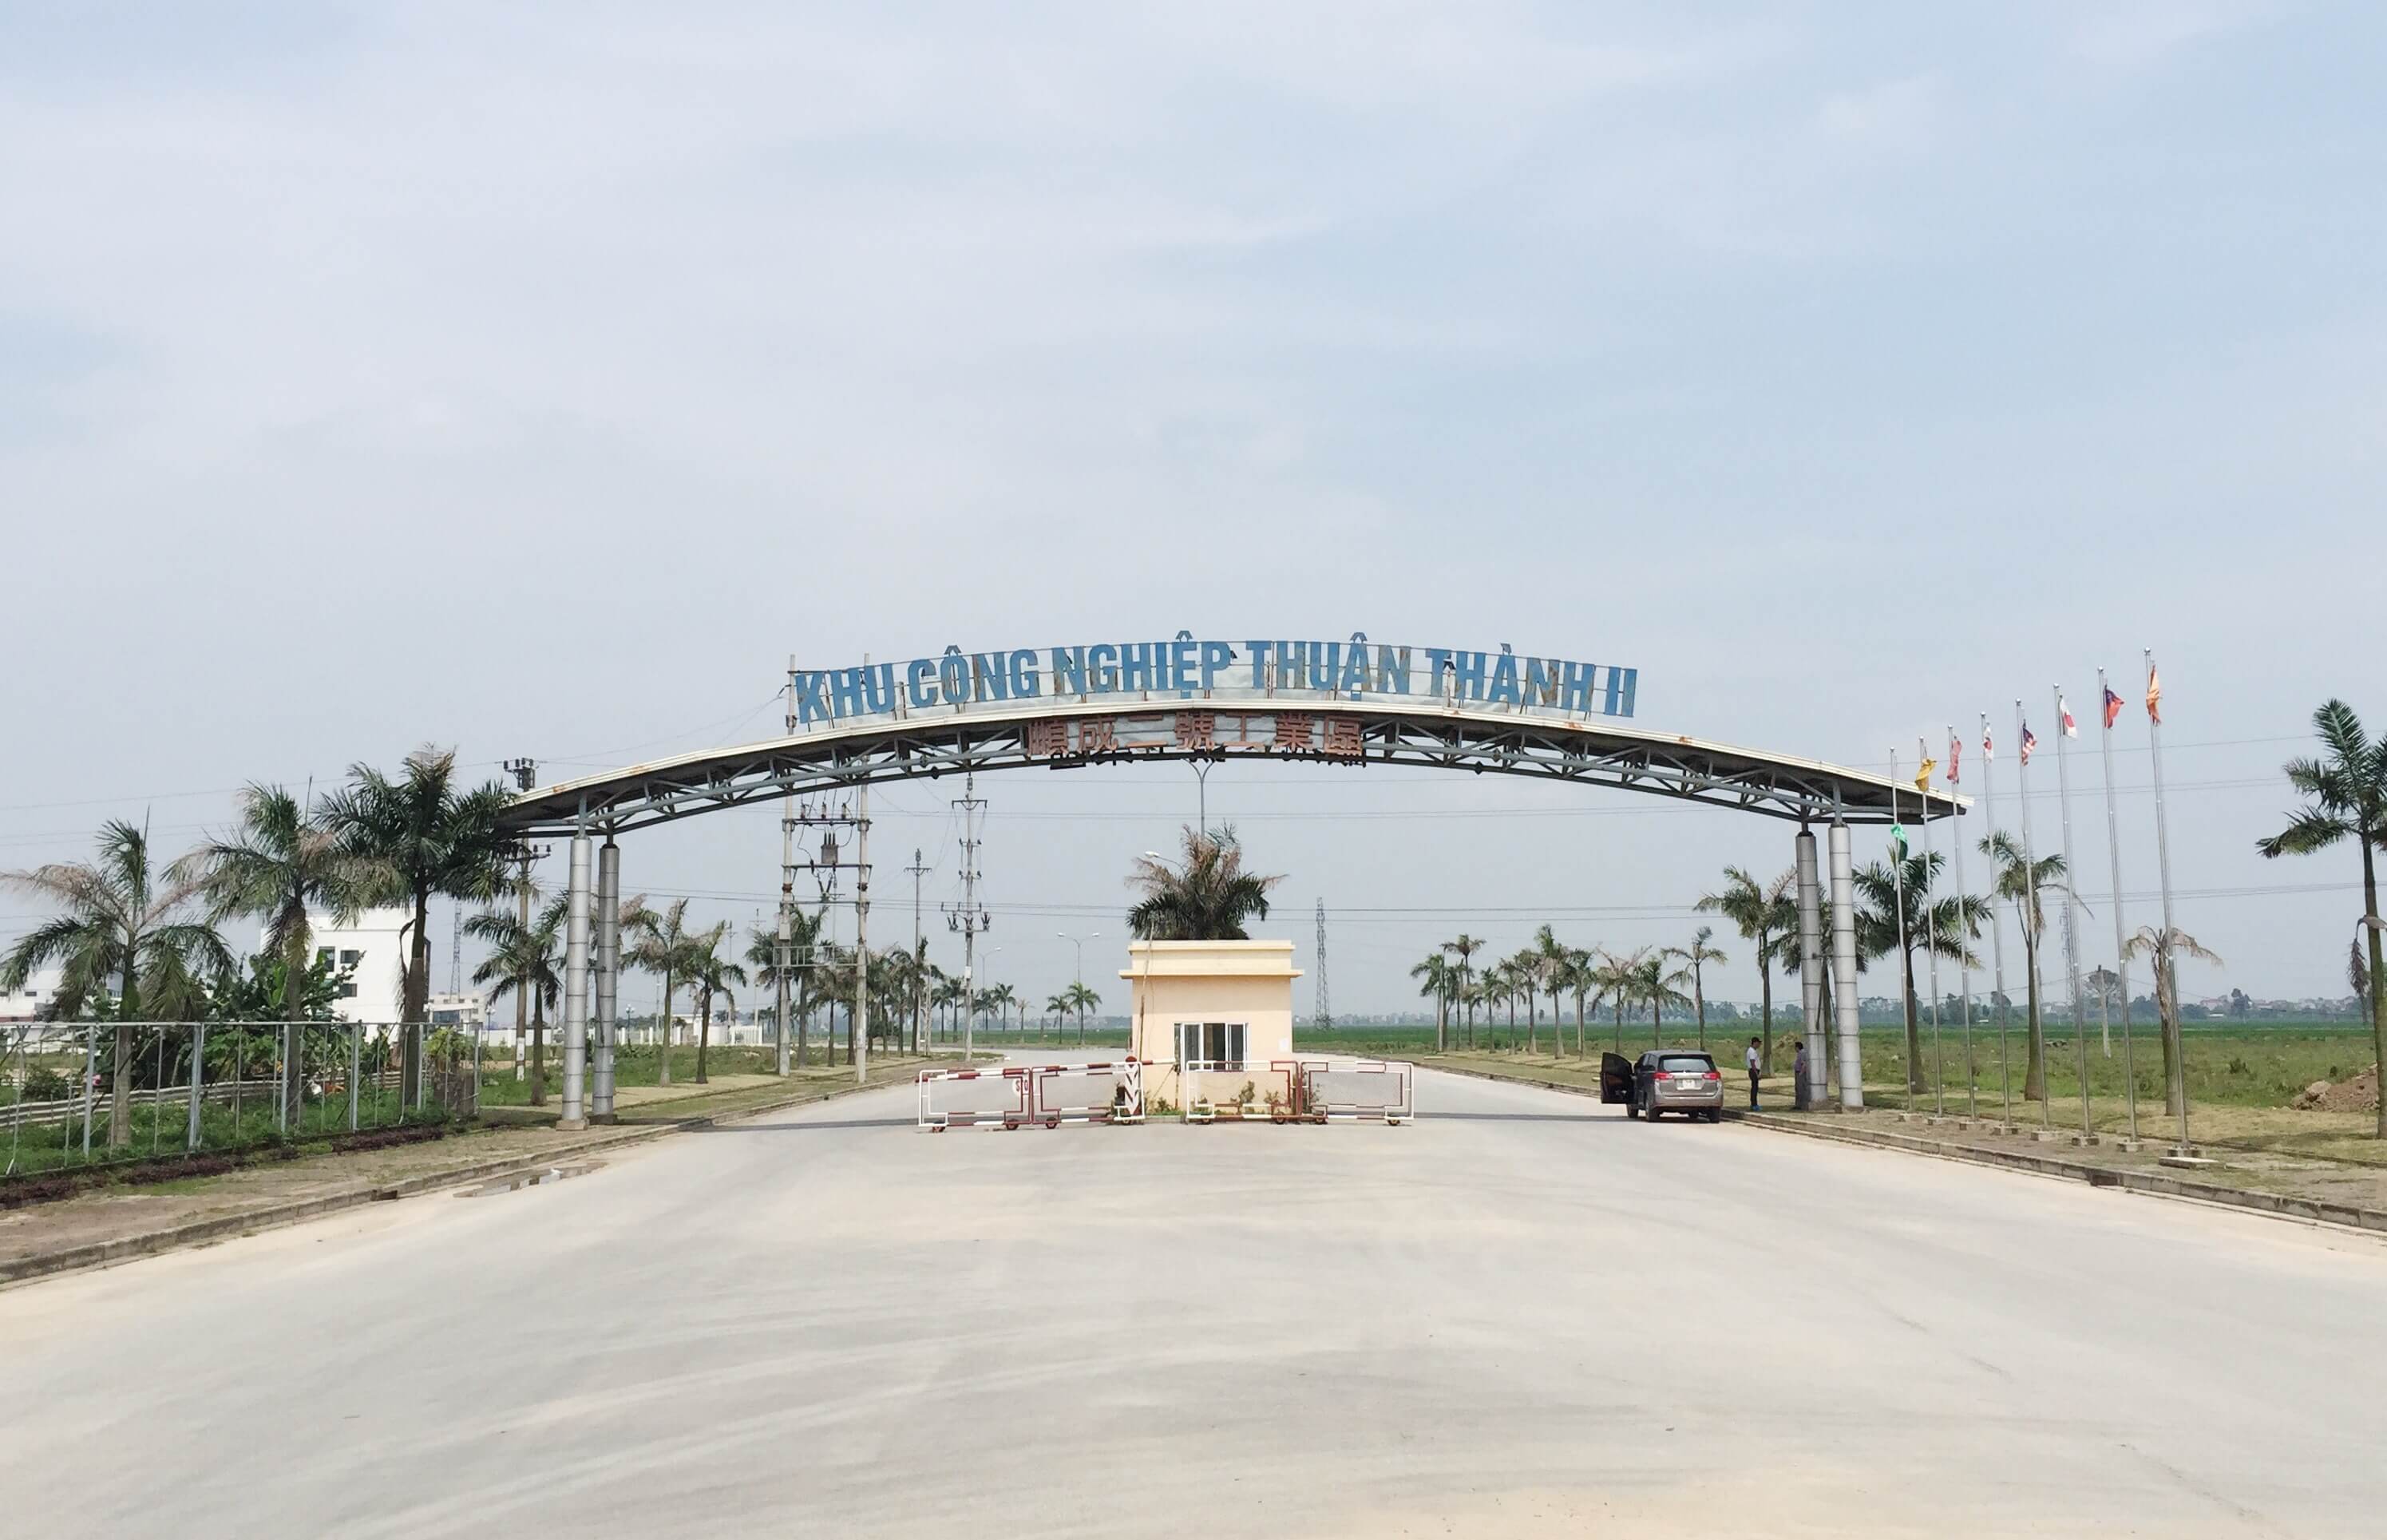 The Centralized Wastewater Treatment  plant for Thuan Thanh 2 Industrial Park